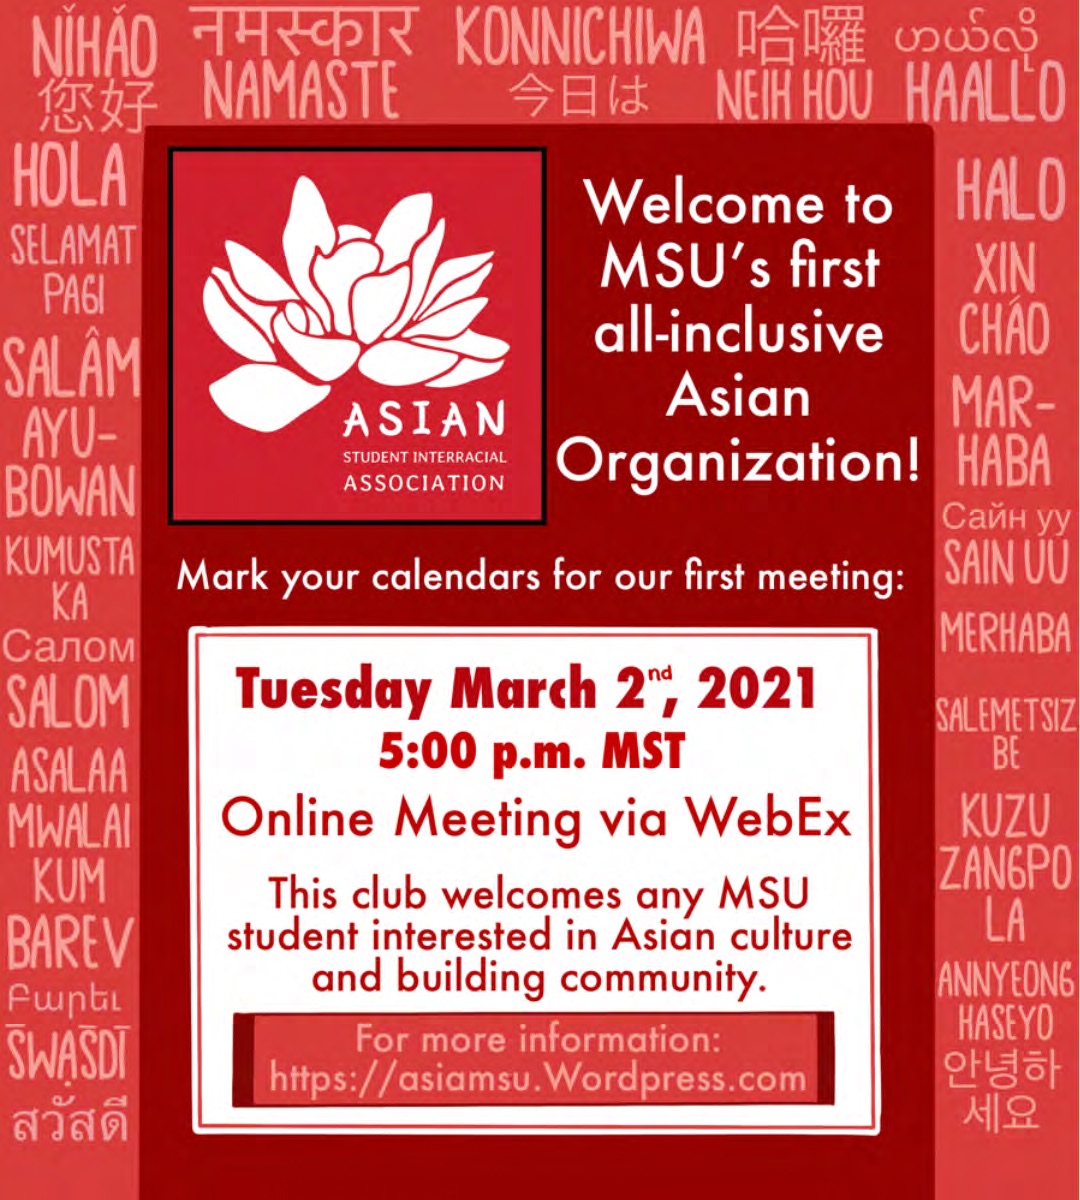 Asian Student Interracial Association. Welcome to MSU's first all-inclusive Asian Organization! Mark your calendars for our first meeting: Tuesday, March 2nd, 2021, 5:00 p.m. Mountain Standard Time. Online meeting via WebEx. This club welcomes any MSU student interested in Asian culture and building community. For more information: https://asiamsu.Wordpress.com.